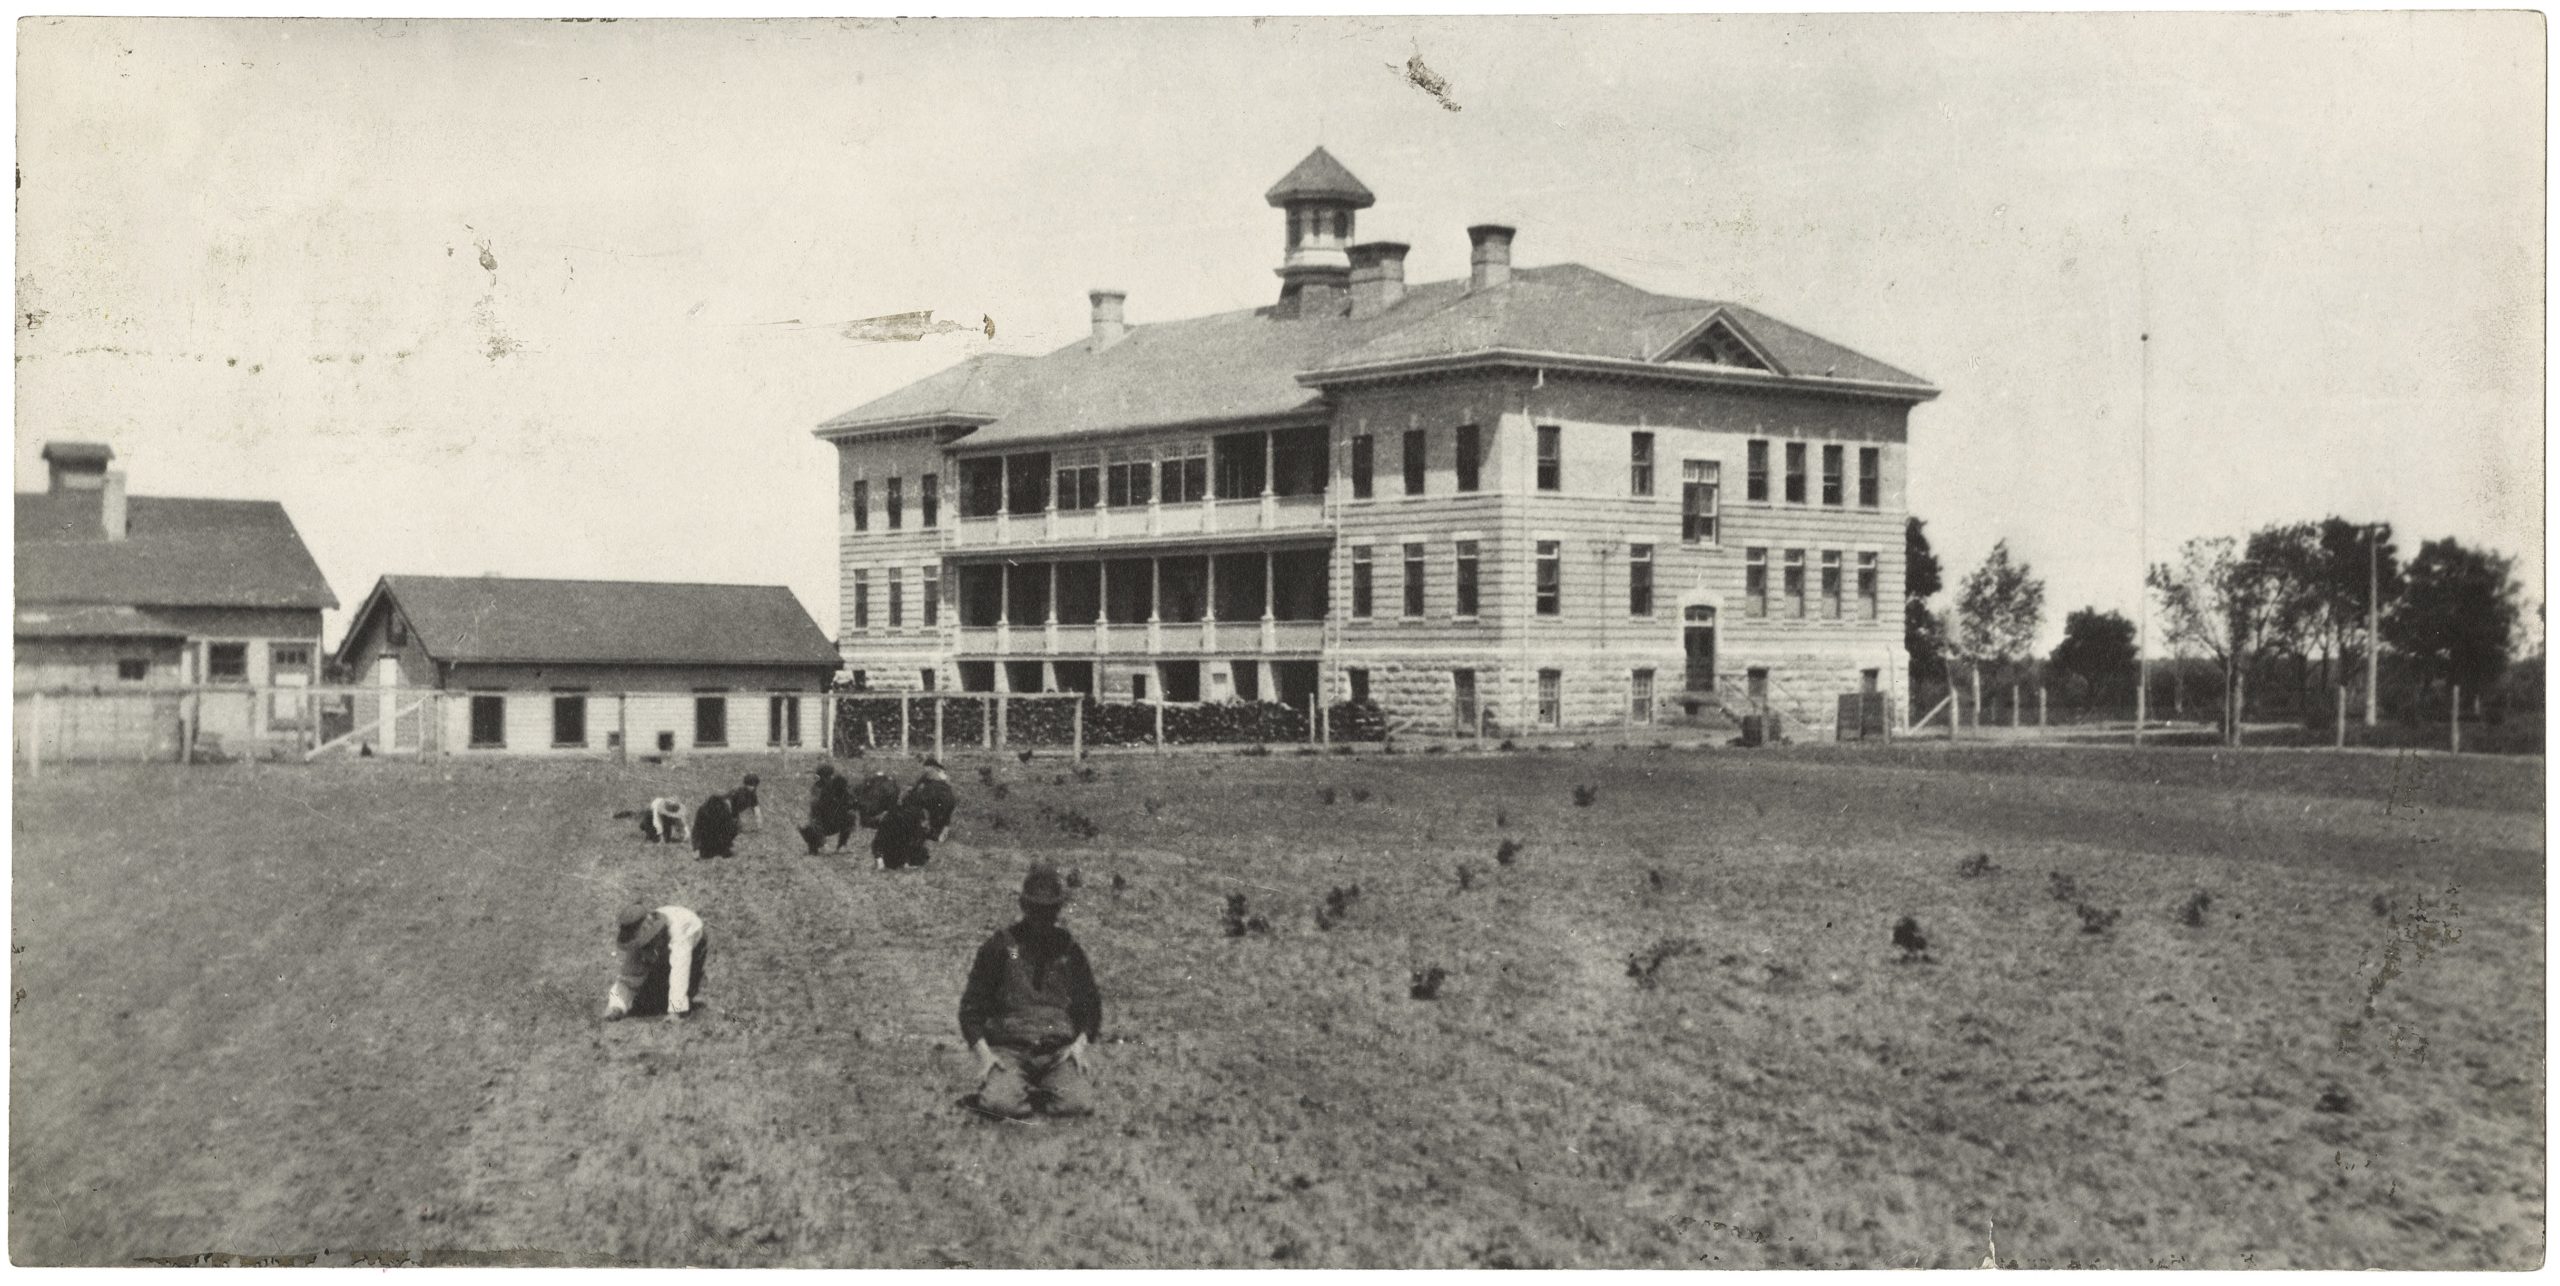 Several people kneeling in a farmed field in front of a large, multi-storey building with several smaller buildings to the side.